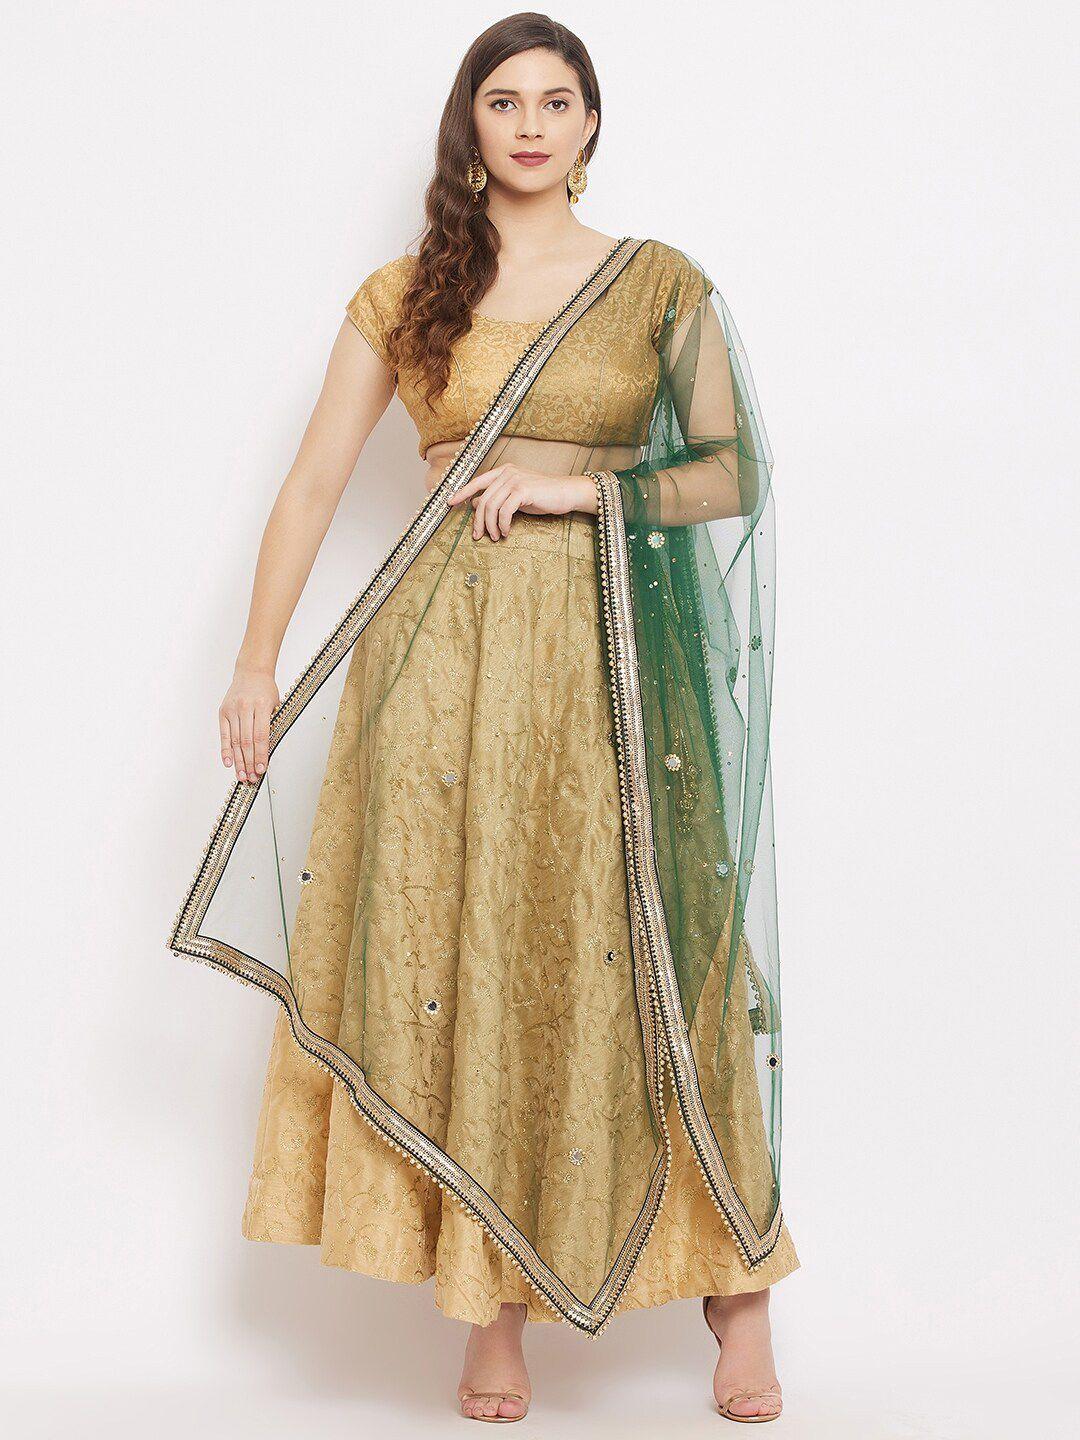 clora-creation-green-&-silver-toned-ethnic-motifs-embroidered-dupatta-with-beads-and-stones